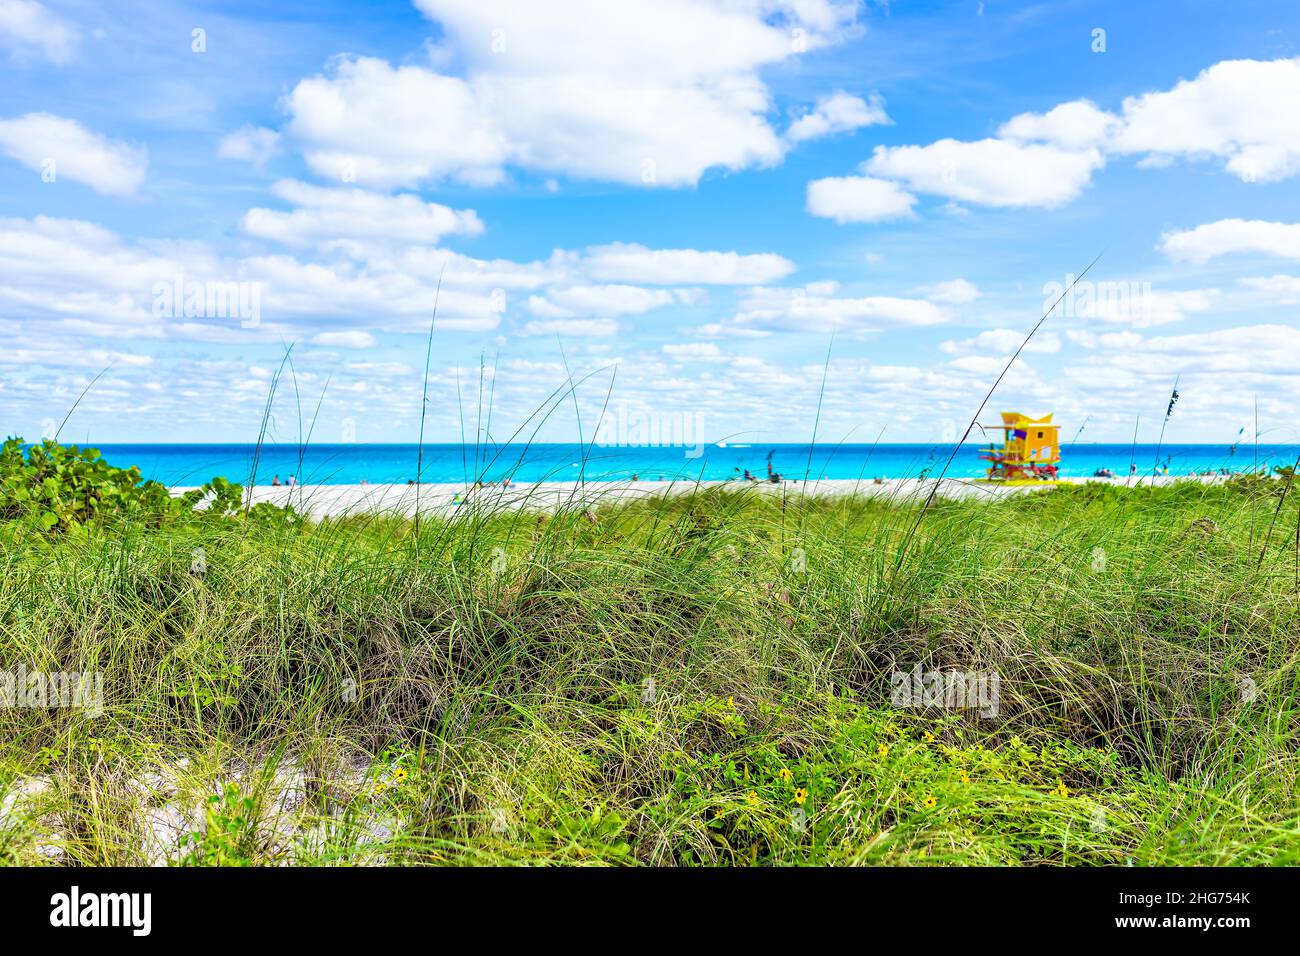 Miami South Beach lifeguard building along ocean coast sunny blue sky clouds in Florida day with people in background by turquoise colorful water colo Stock Photo